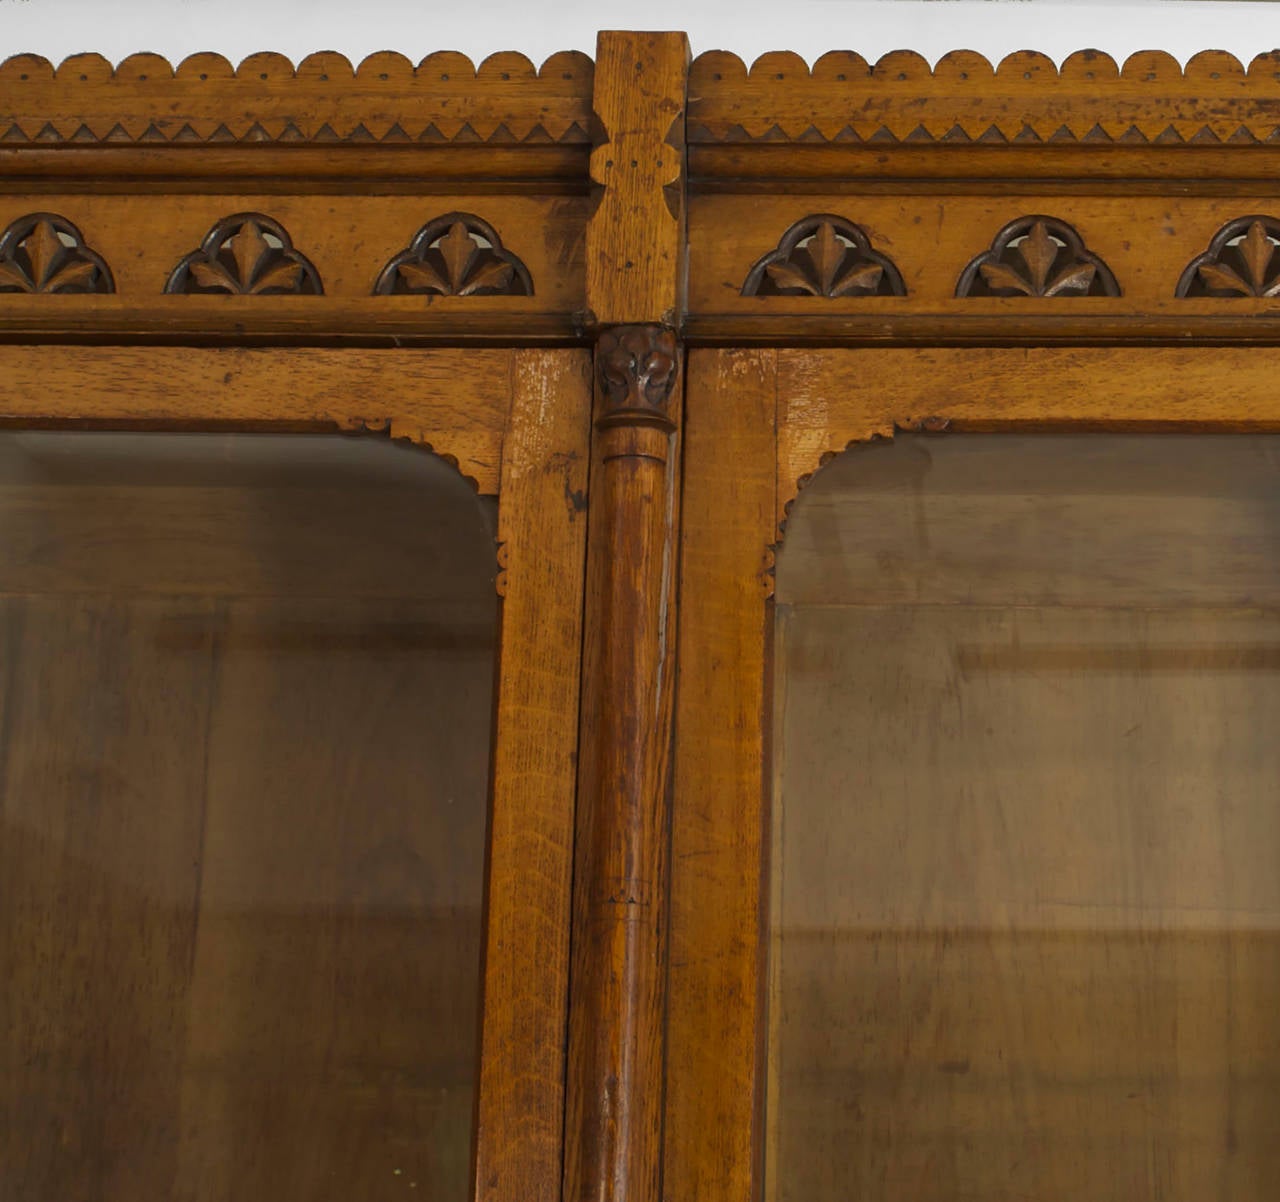 Turn of the century English Arts and Crafts yew wood bookcase with three glass doors over three solid doors with a carved and scalloped pediment top.